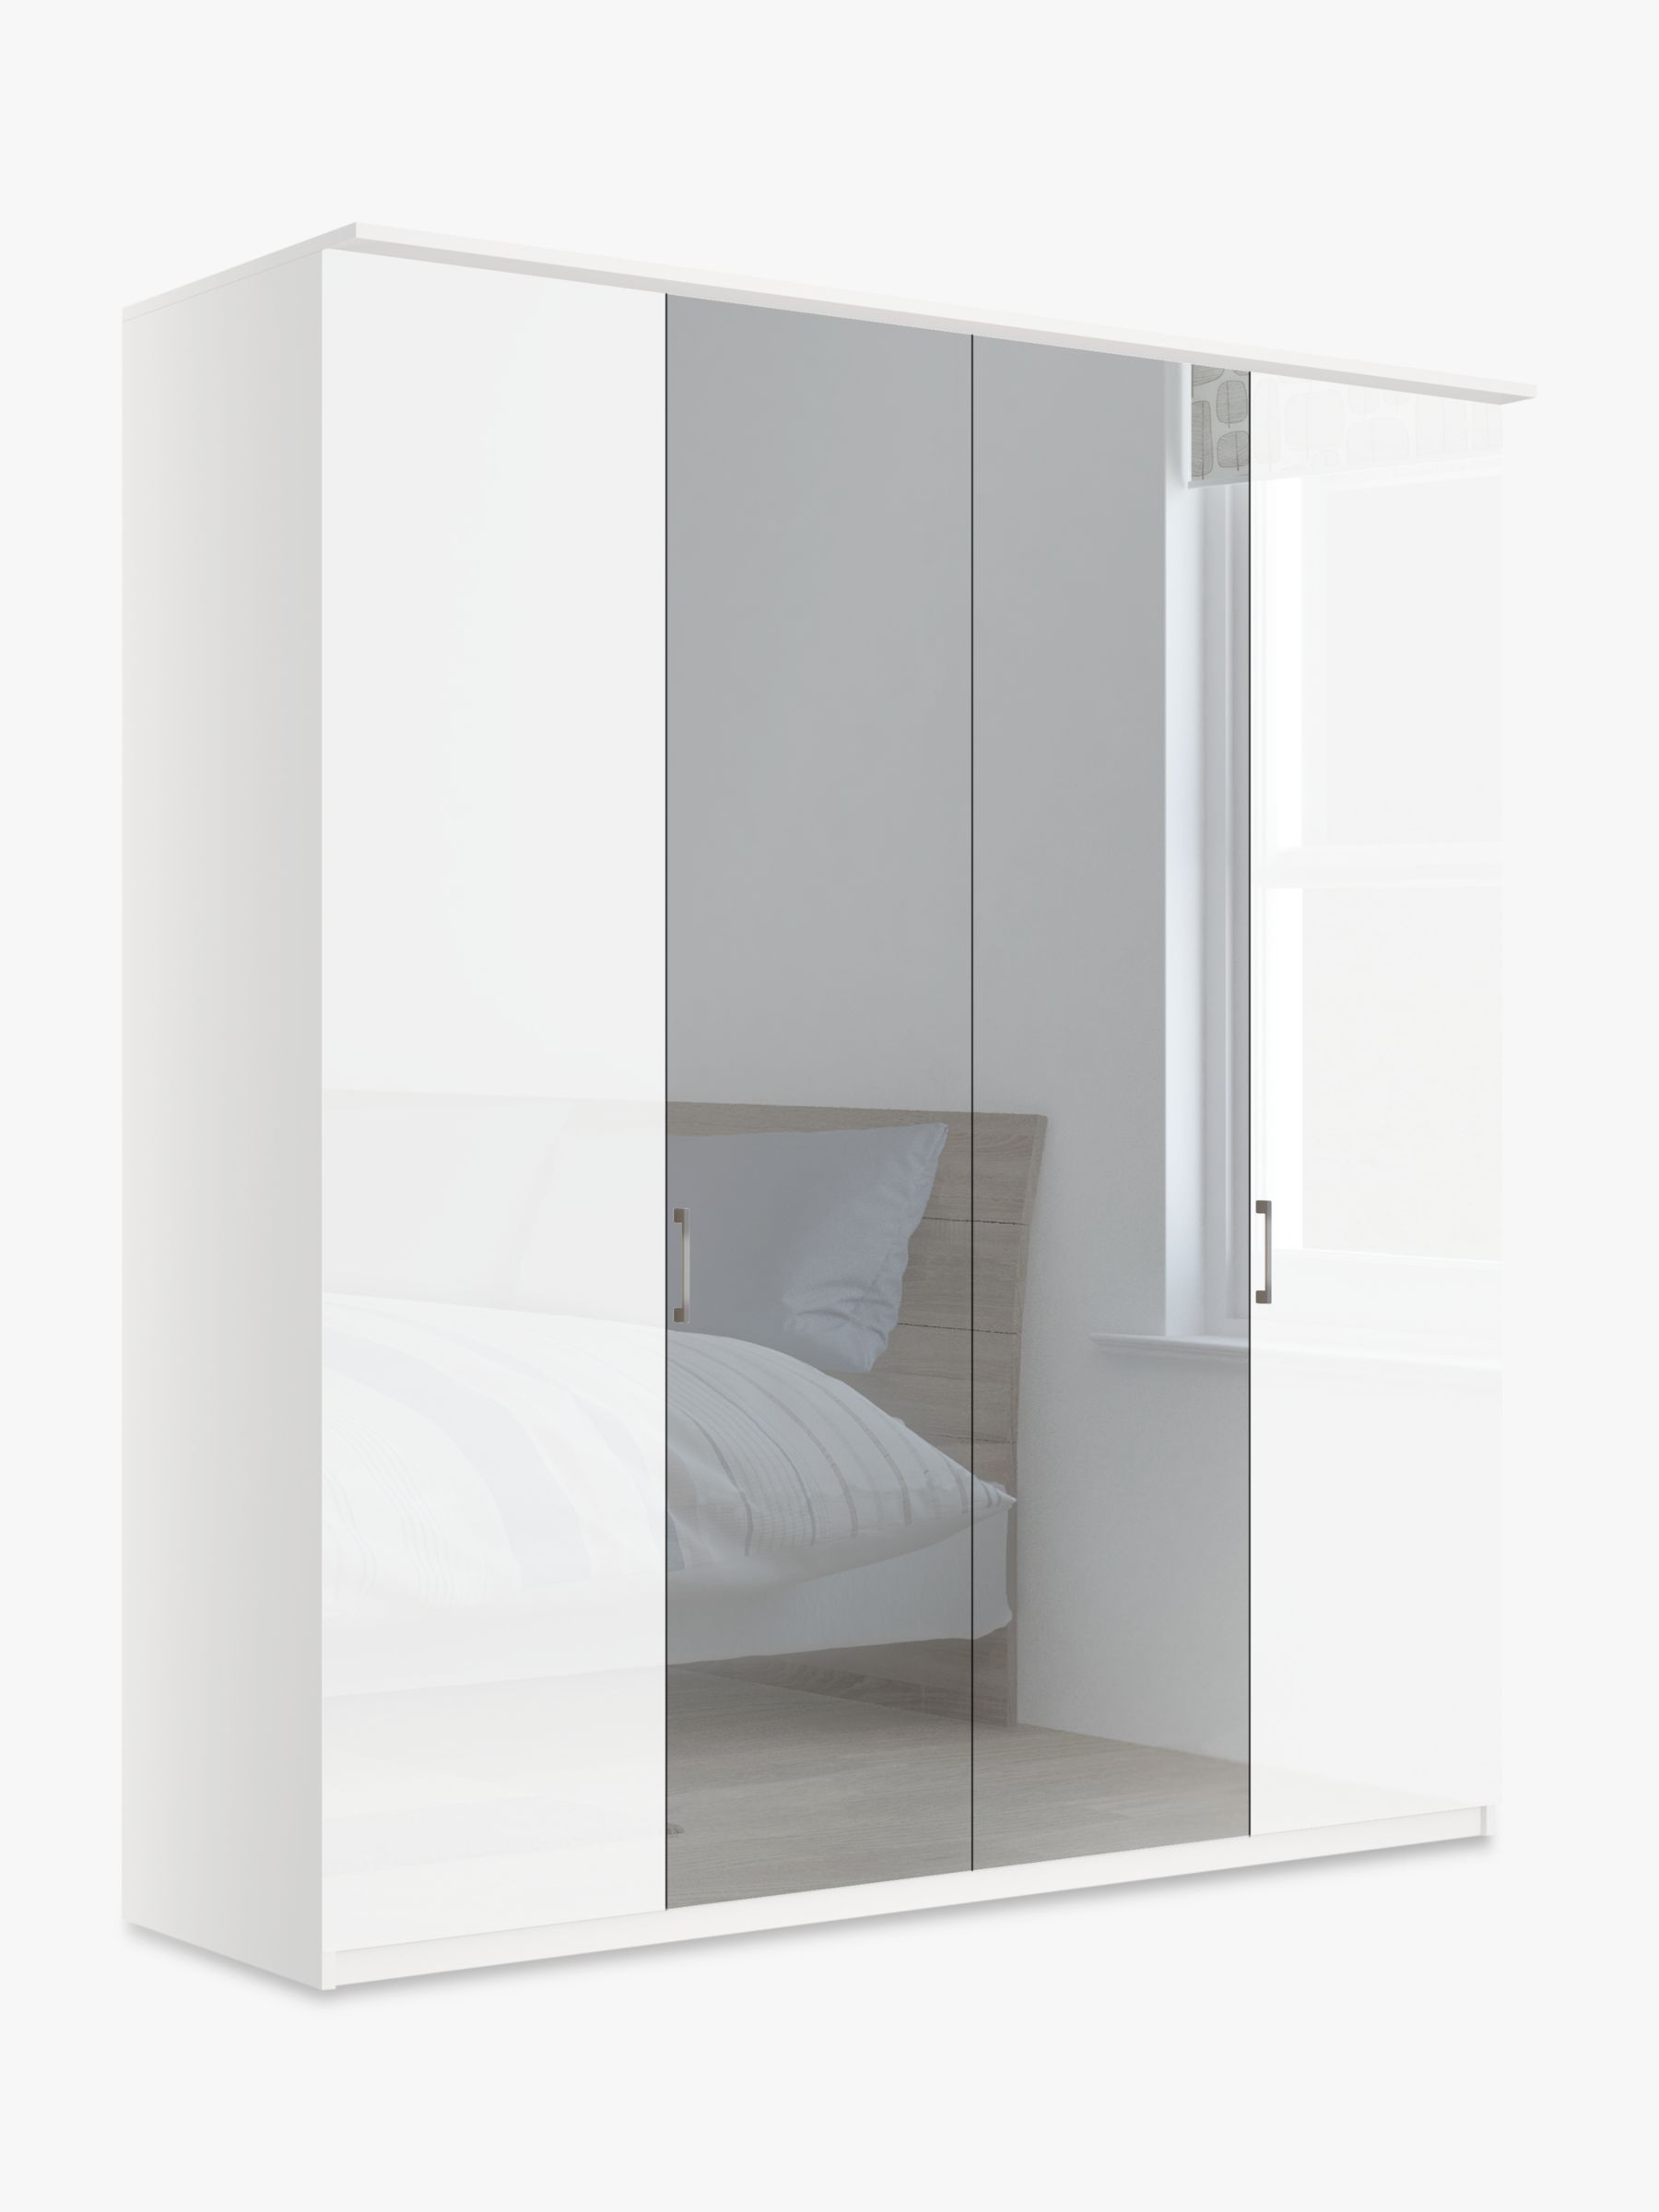 Photo of John lewis elstra 200cm wardrobe with white glass and mirrored hinged doors